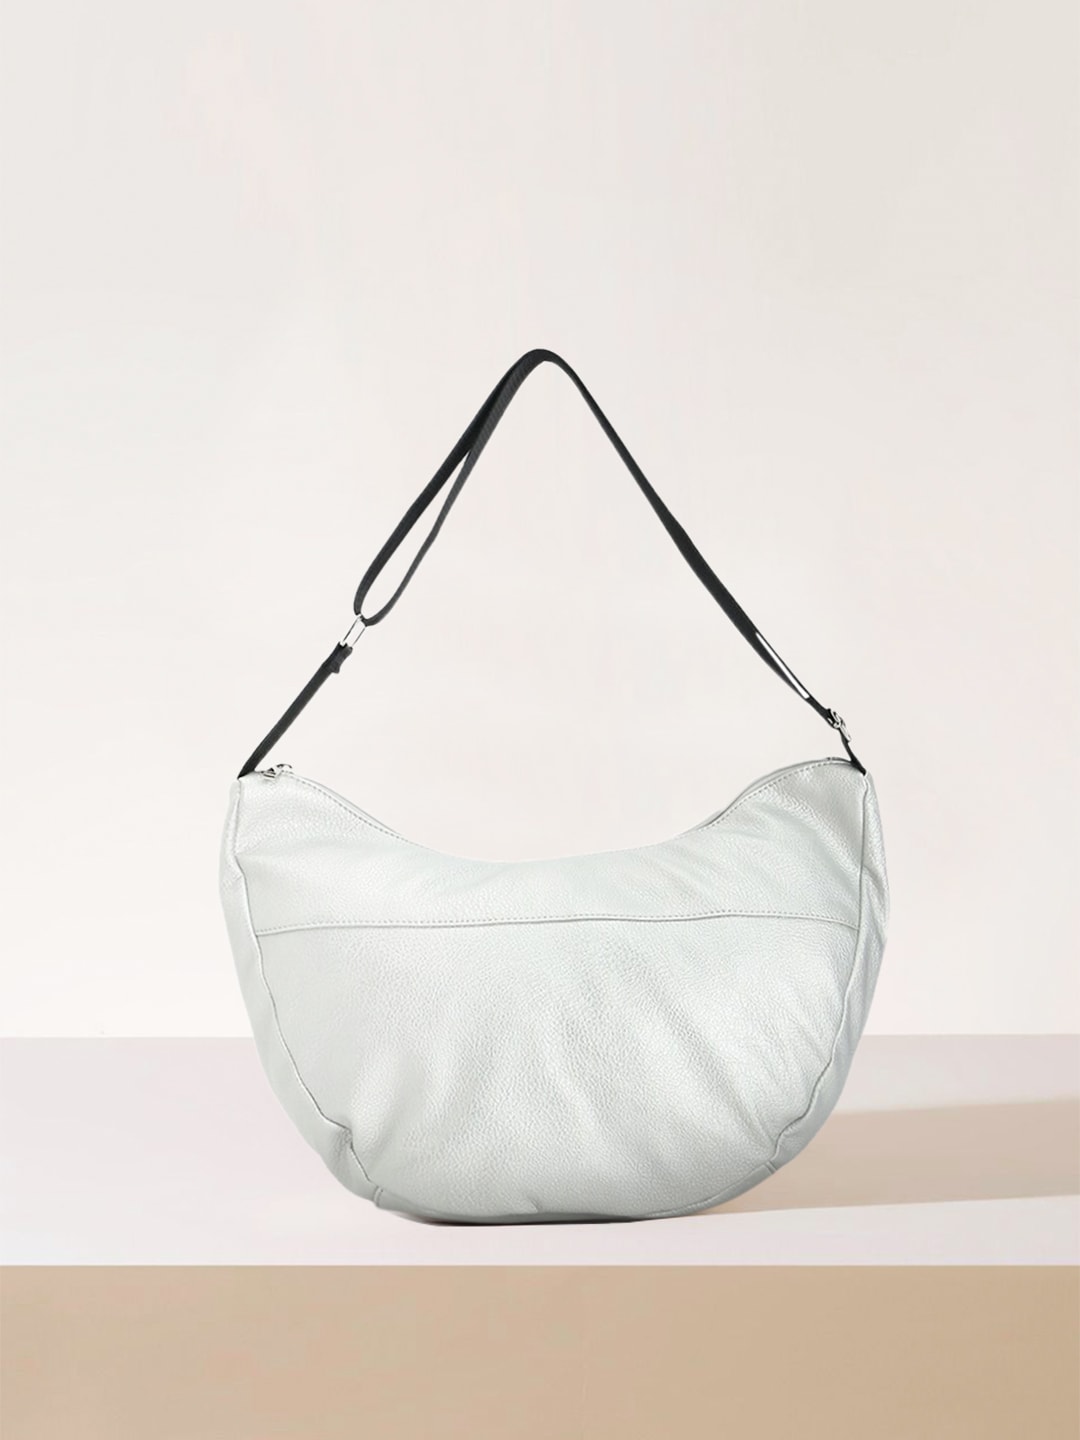 FOREVER 21 Silver-Toned Solid Hobo Bag Price in India